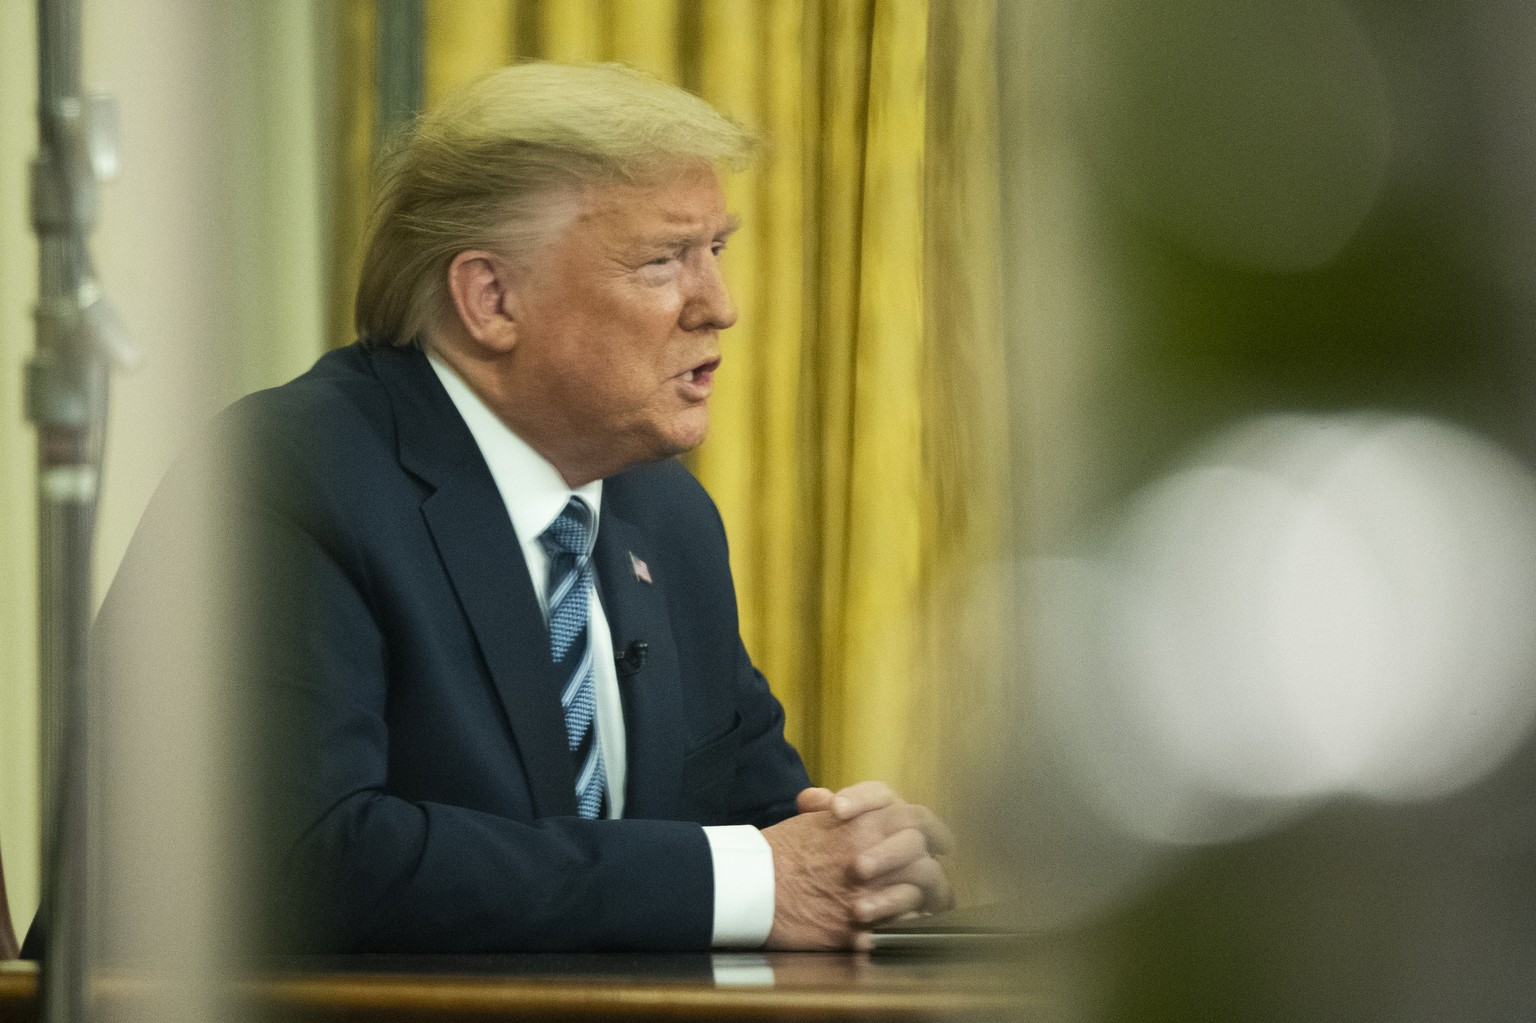 President Donald Trump addresses the nation from the Oval Office at the White House, Wednesday, March 11, 2020, in Washington. (AP Photo/Manuel Balce Ceneta)